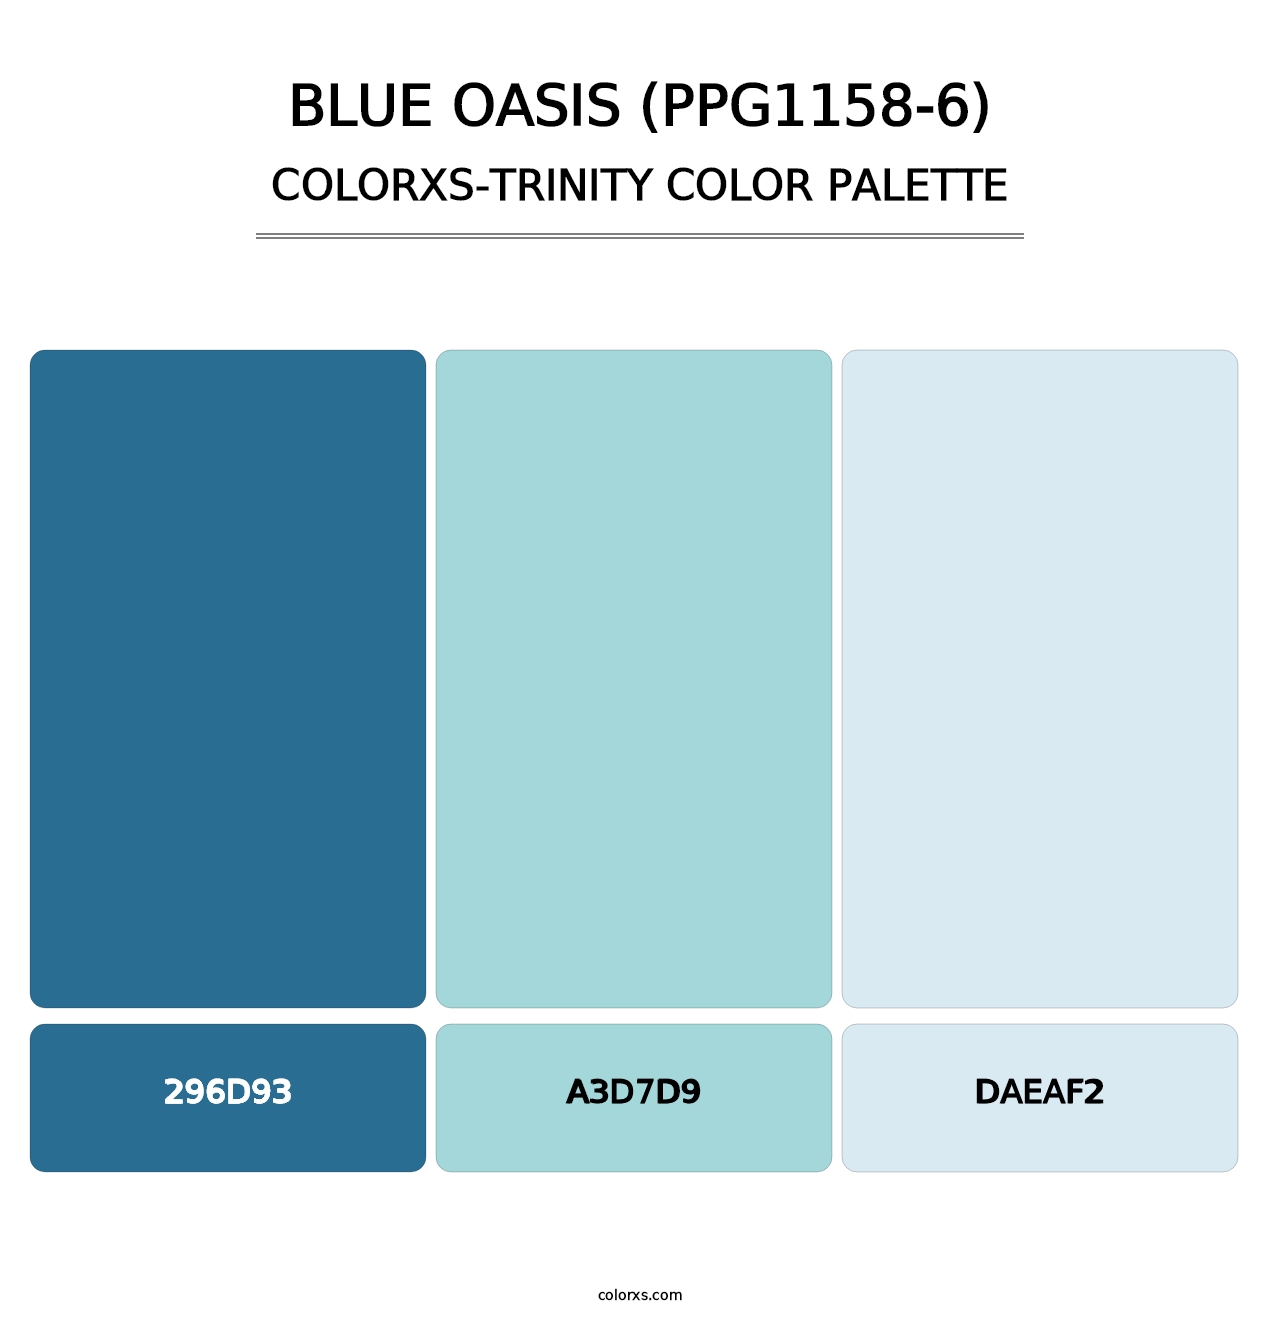 Blue Oasis (PPG1158-6) - Colorxs Trinity Palette